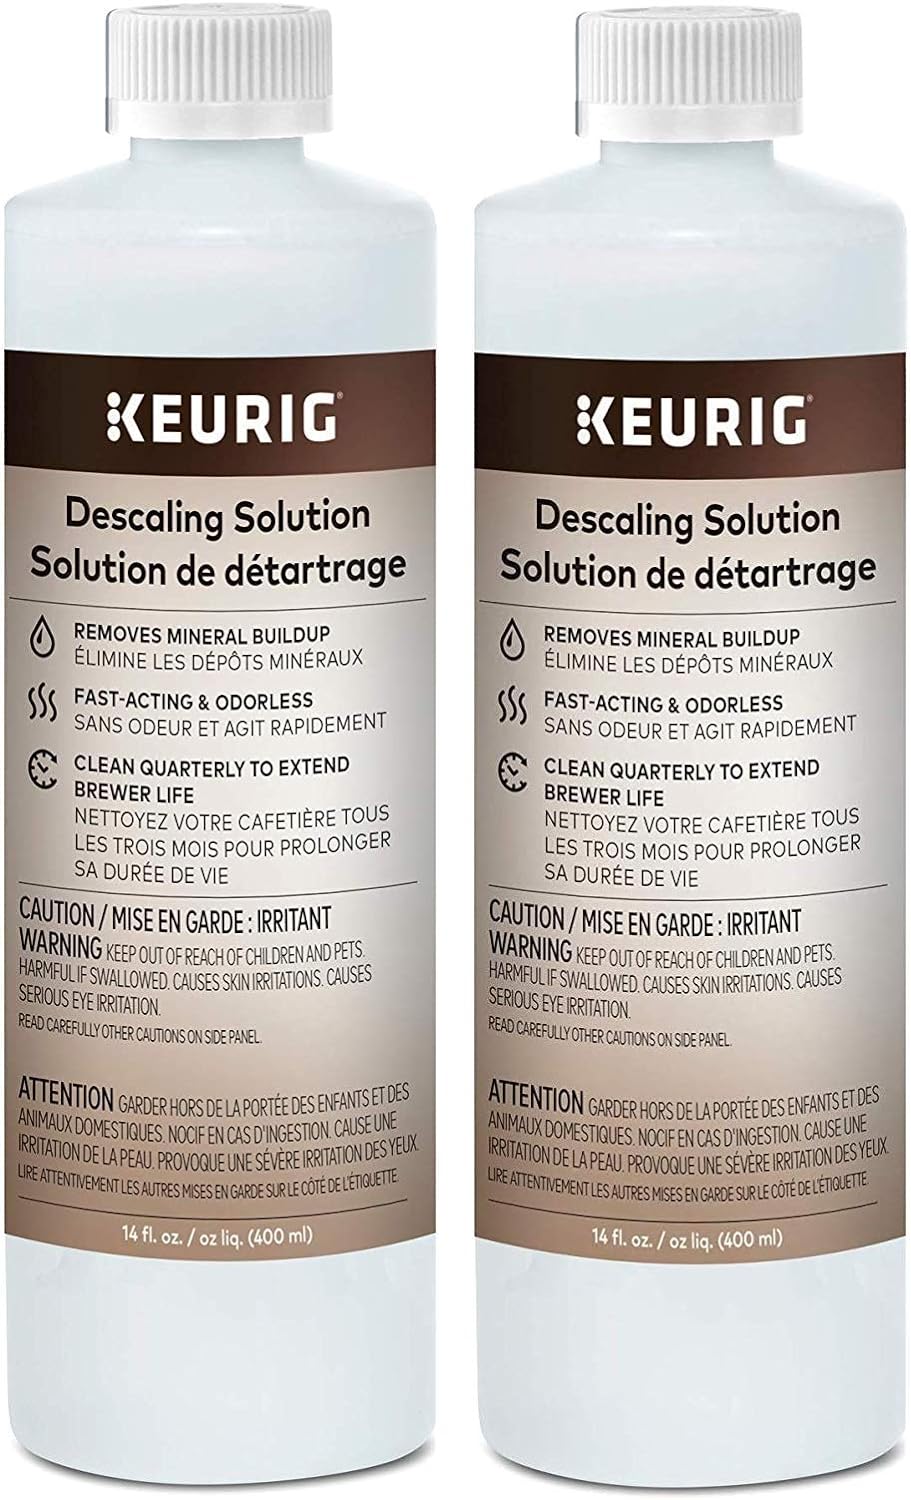 This works so well! The instructions were very clear and I followed them exactly. I've used one bottle of this descaler on my ~ 2 years old Keurig (which had tons of hard water scale built up). Now the tank is clean and the inner workings of the machine are functioning better-- the 